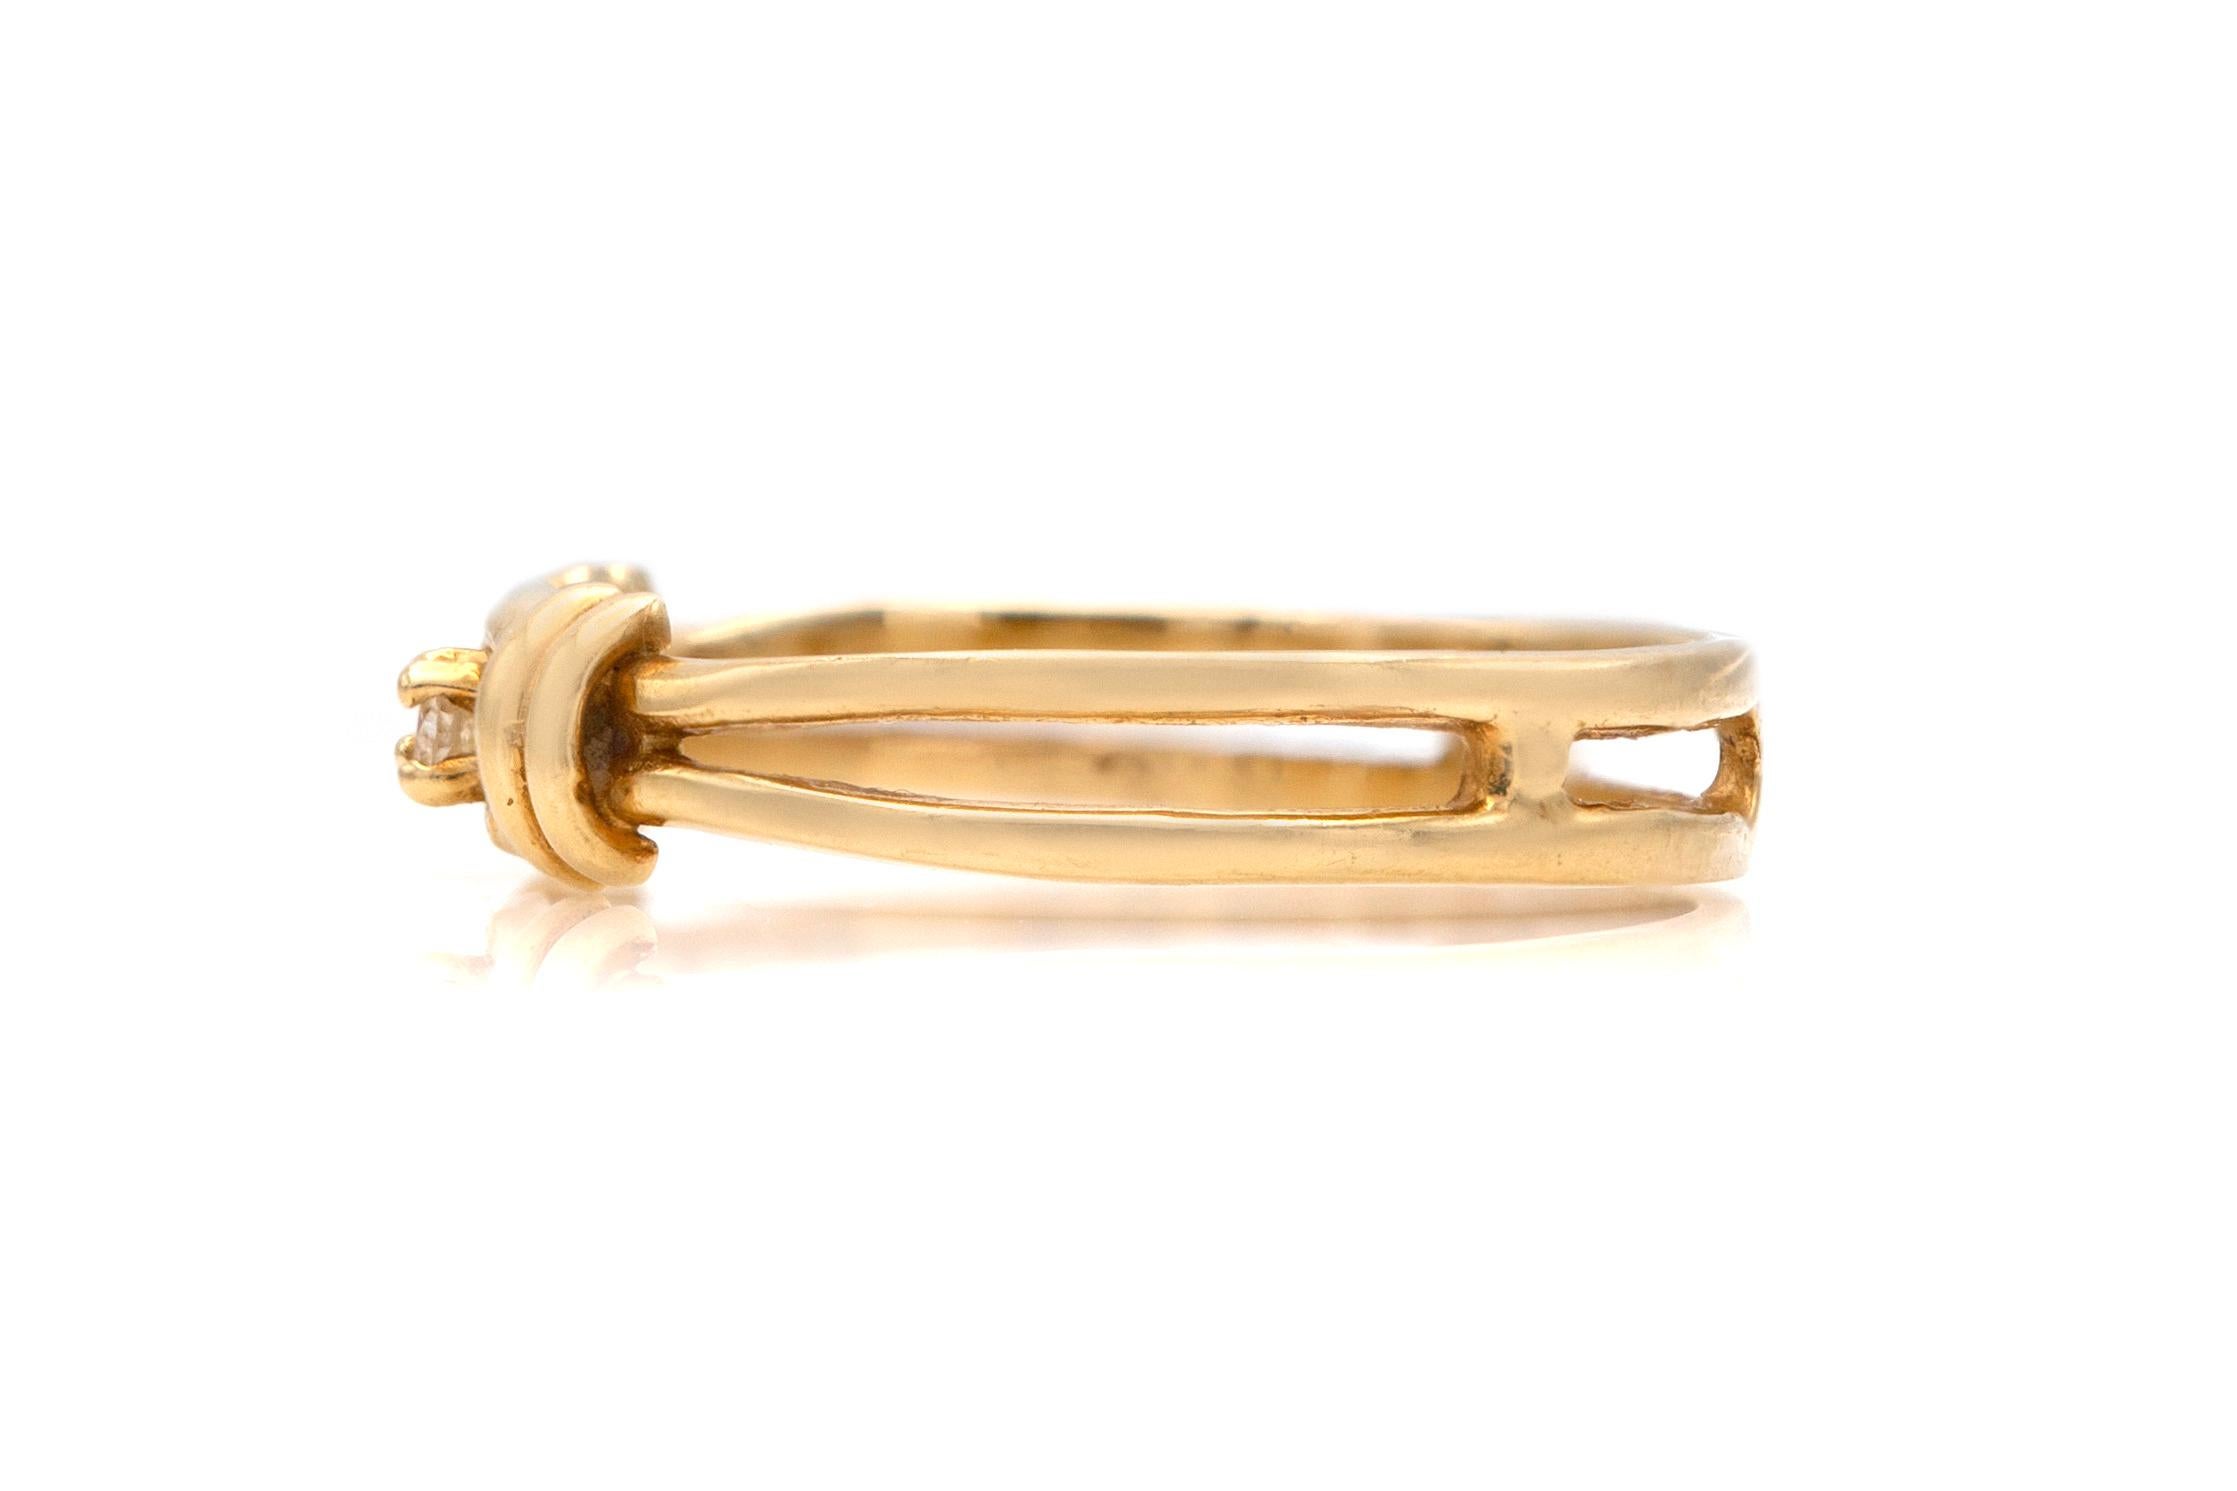 Finely crafted in 14K yellow gold with a diamond center stone weighing approximately 0.05 carat.